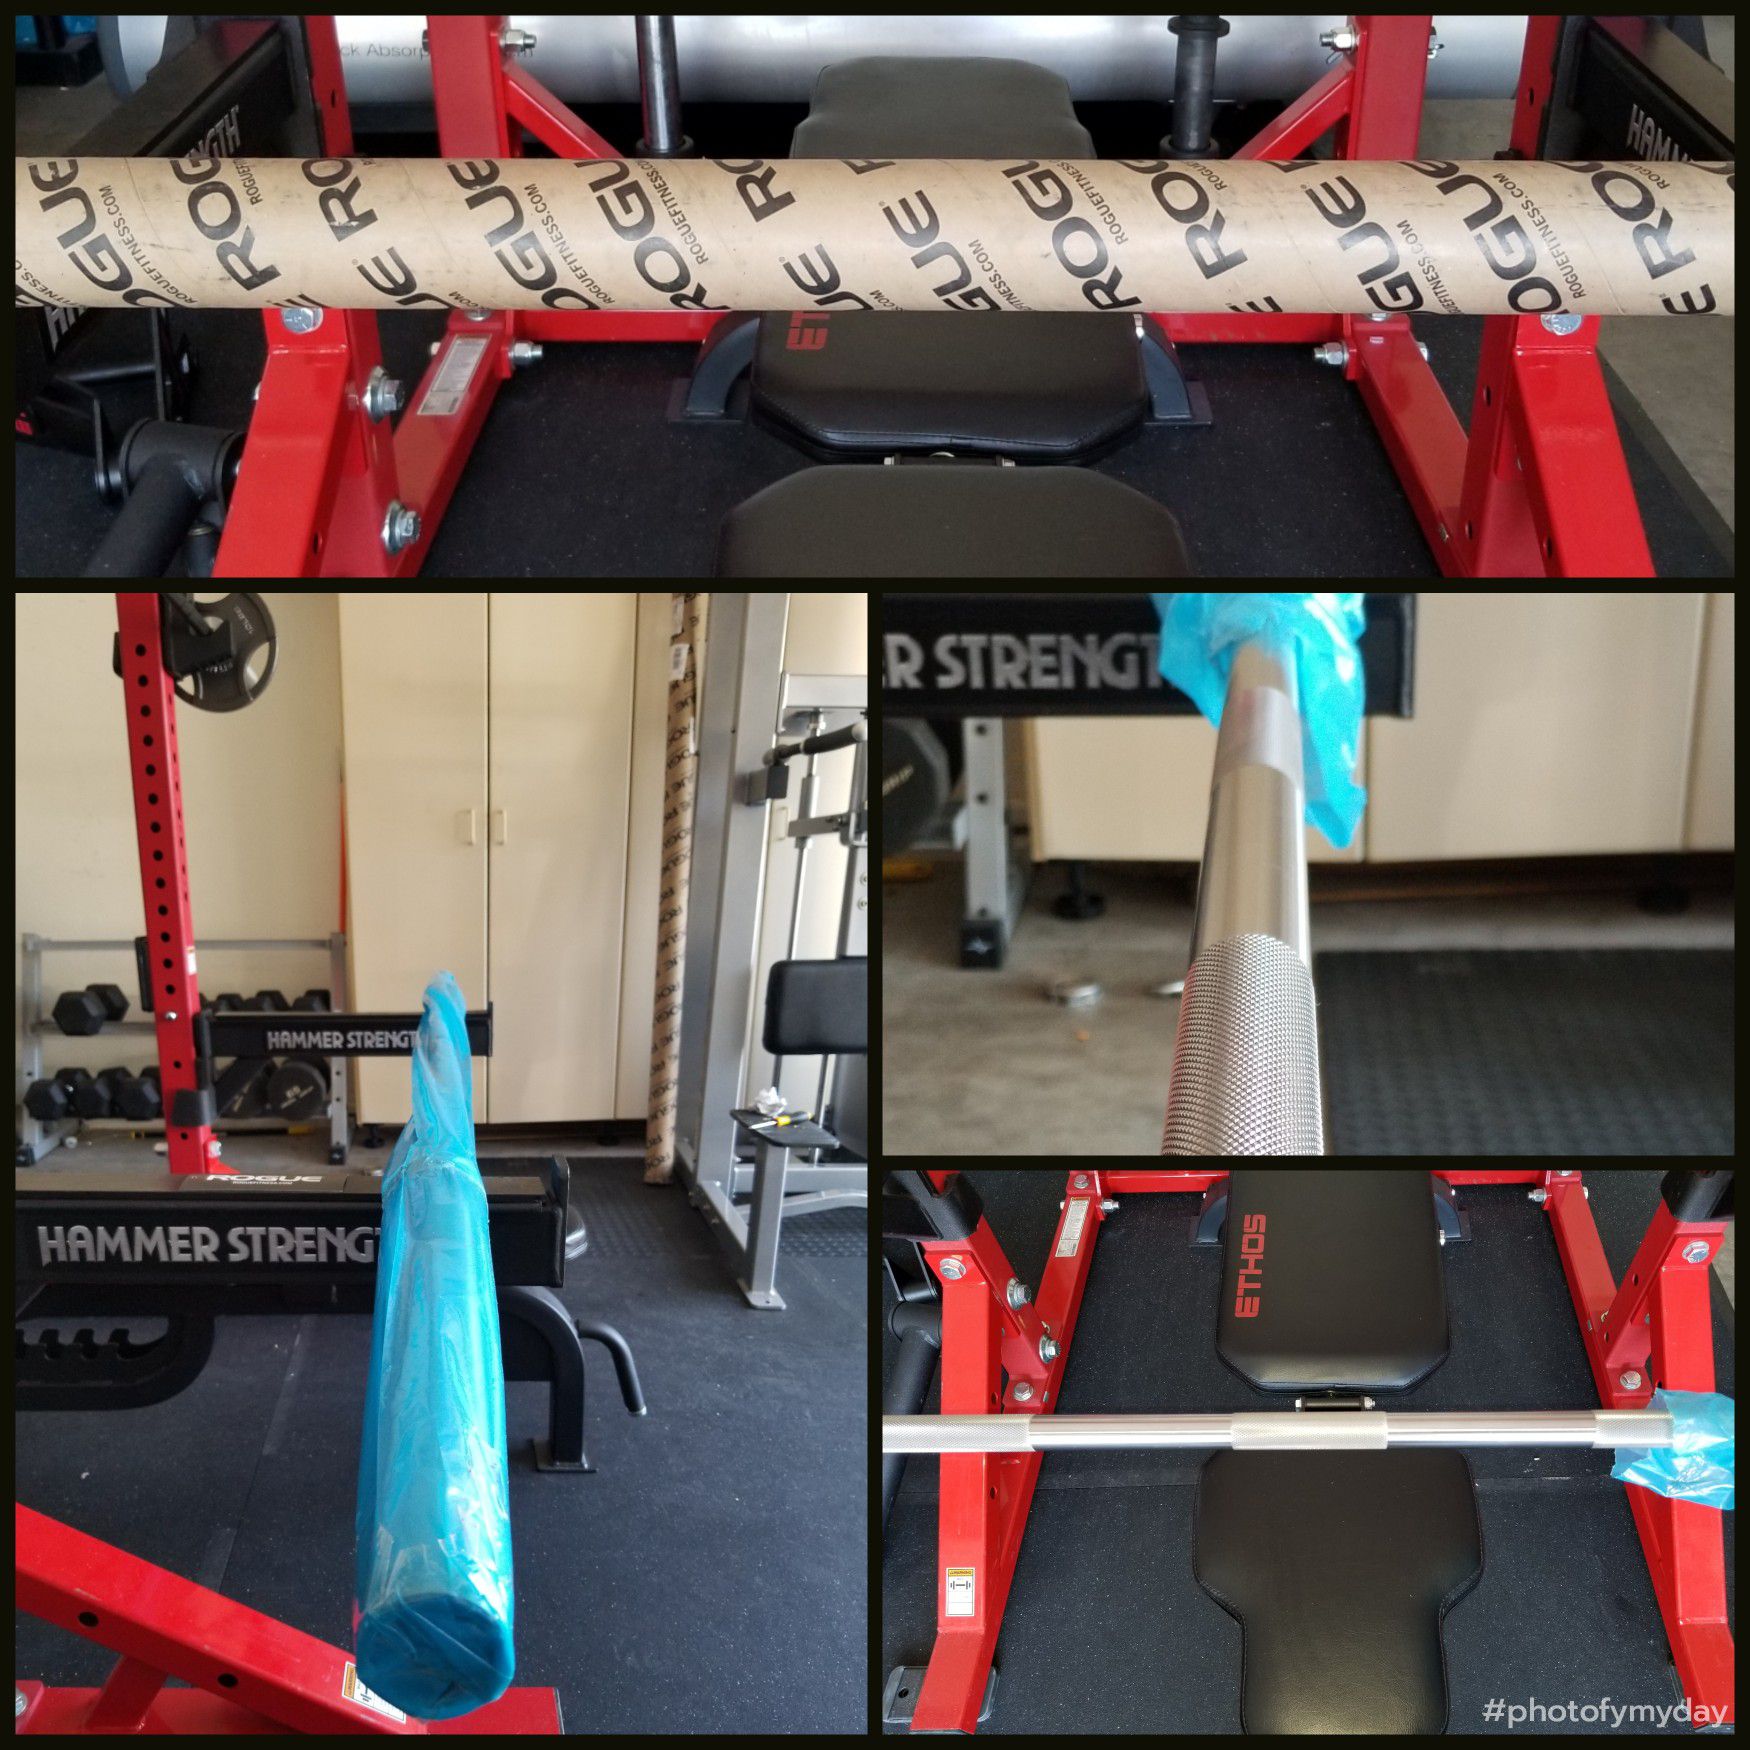 🏋️‍♂️💯% NEW‼ Gorgeous ROGUE Ohio Power Bar 🏋️‍♂️🔥, gym equipment,home gym,barbell,weights,squat rack.